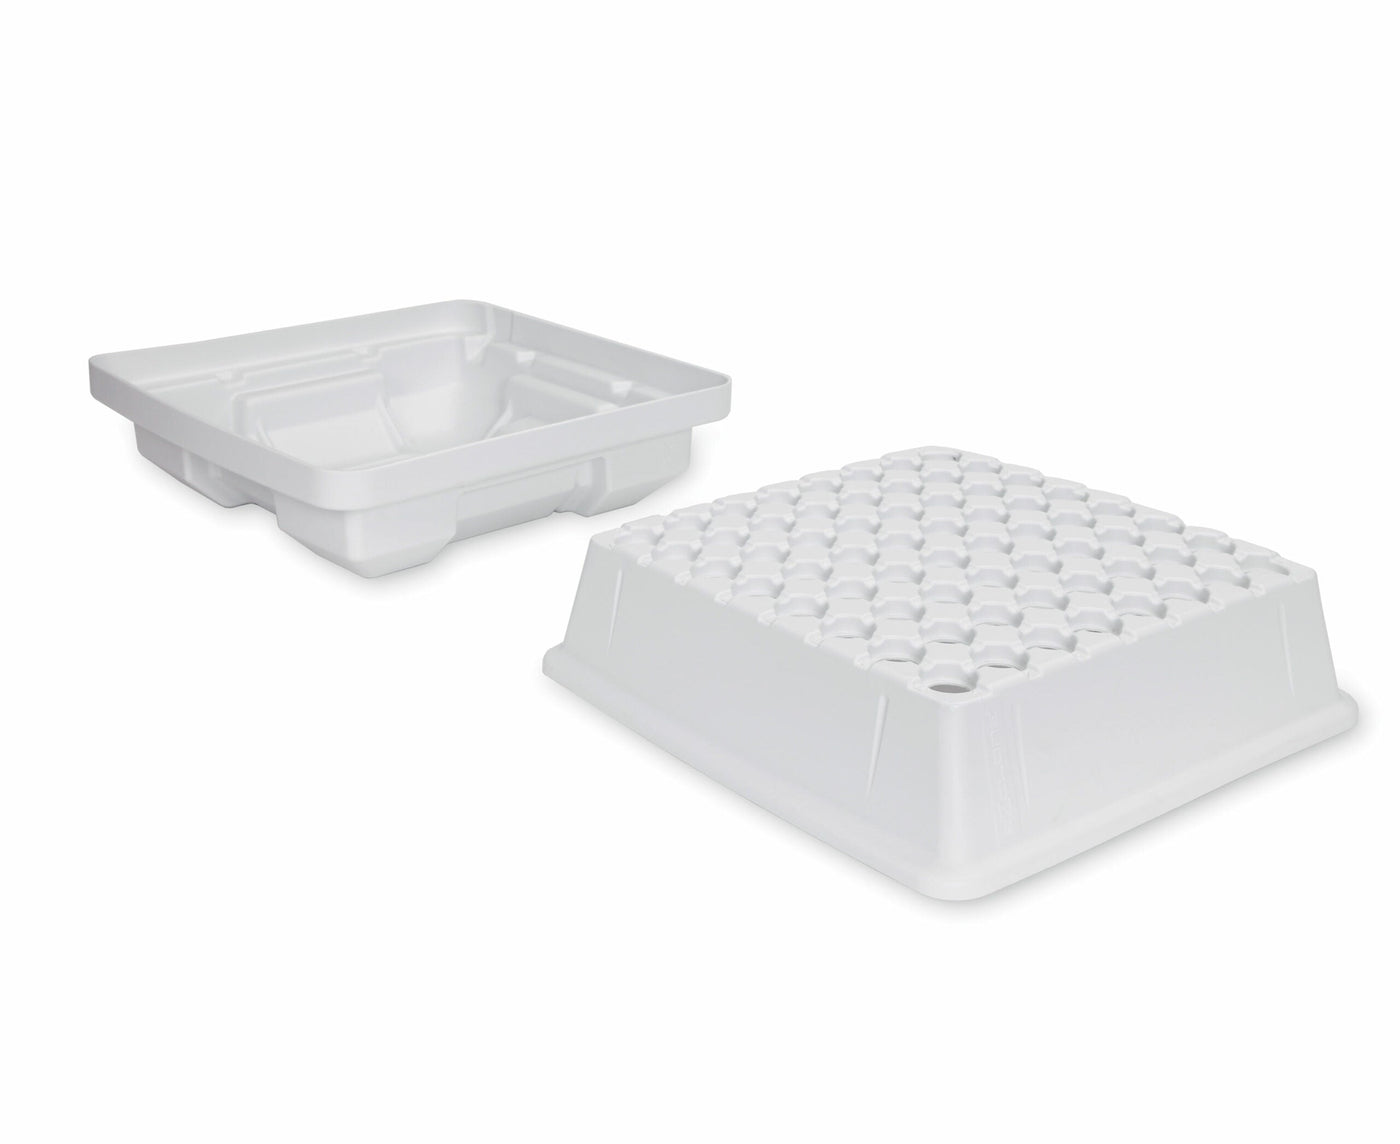 EZ-CLONE® Lid and Reservoir Replacement Set